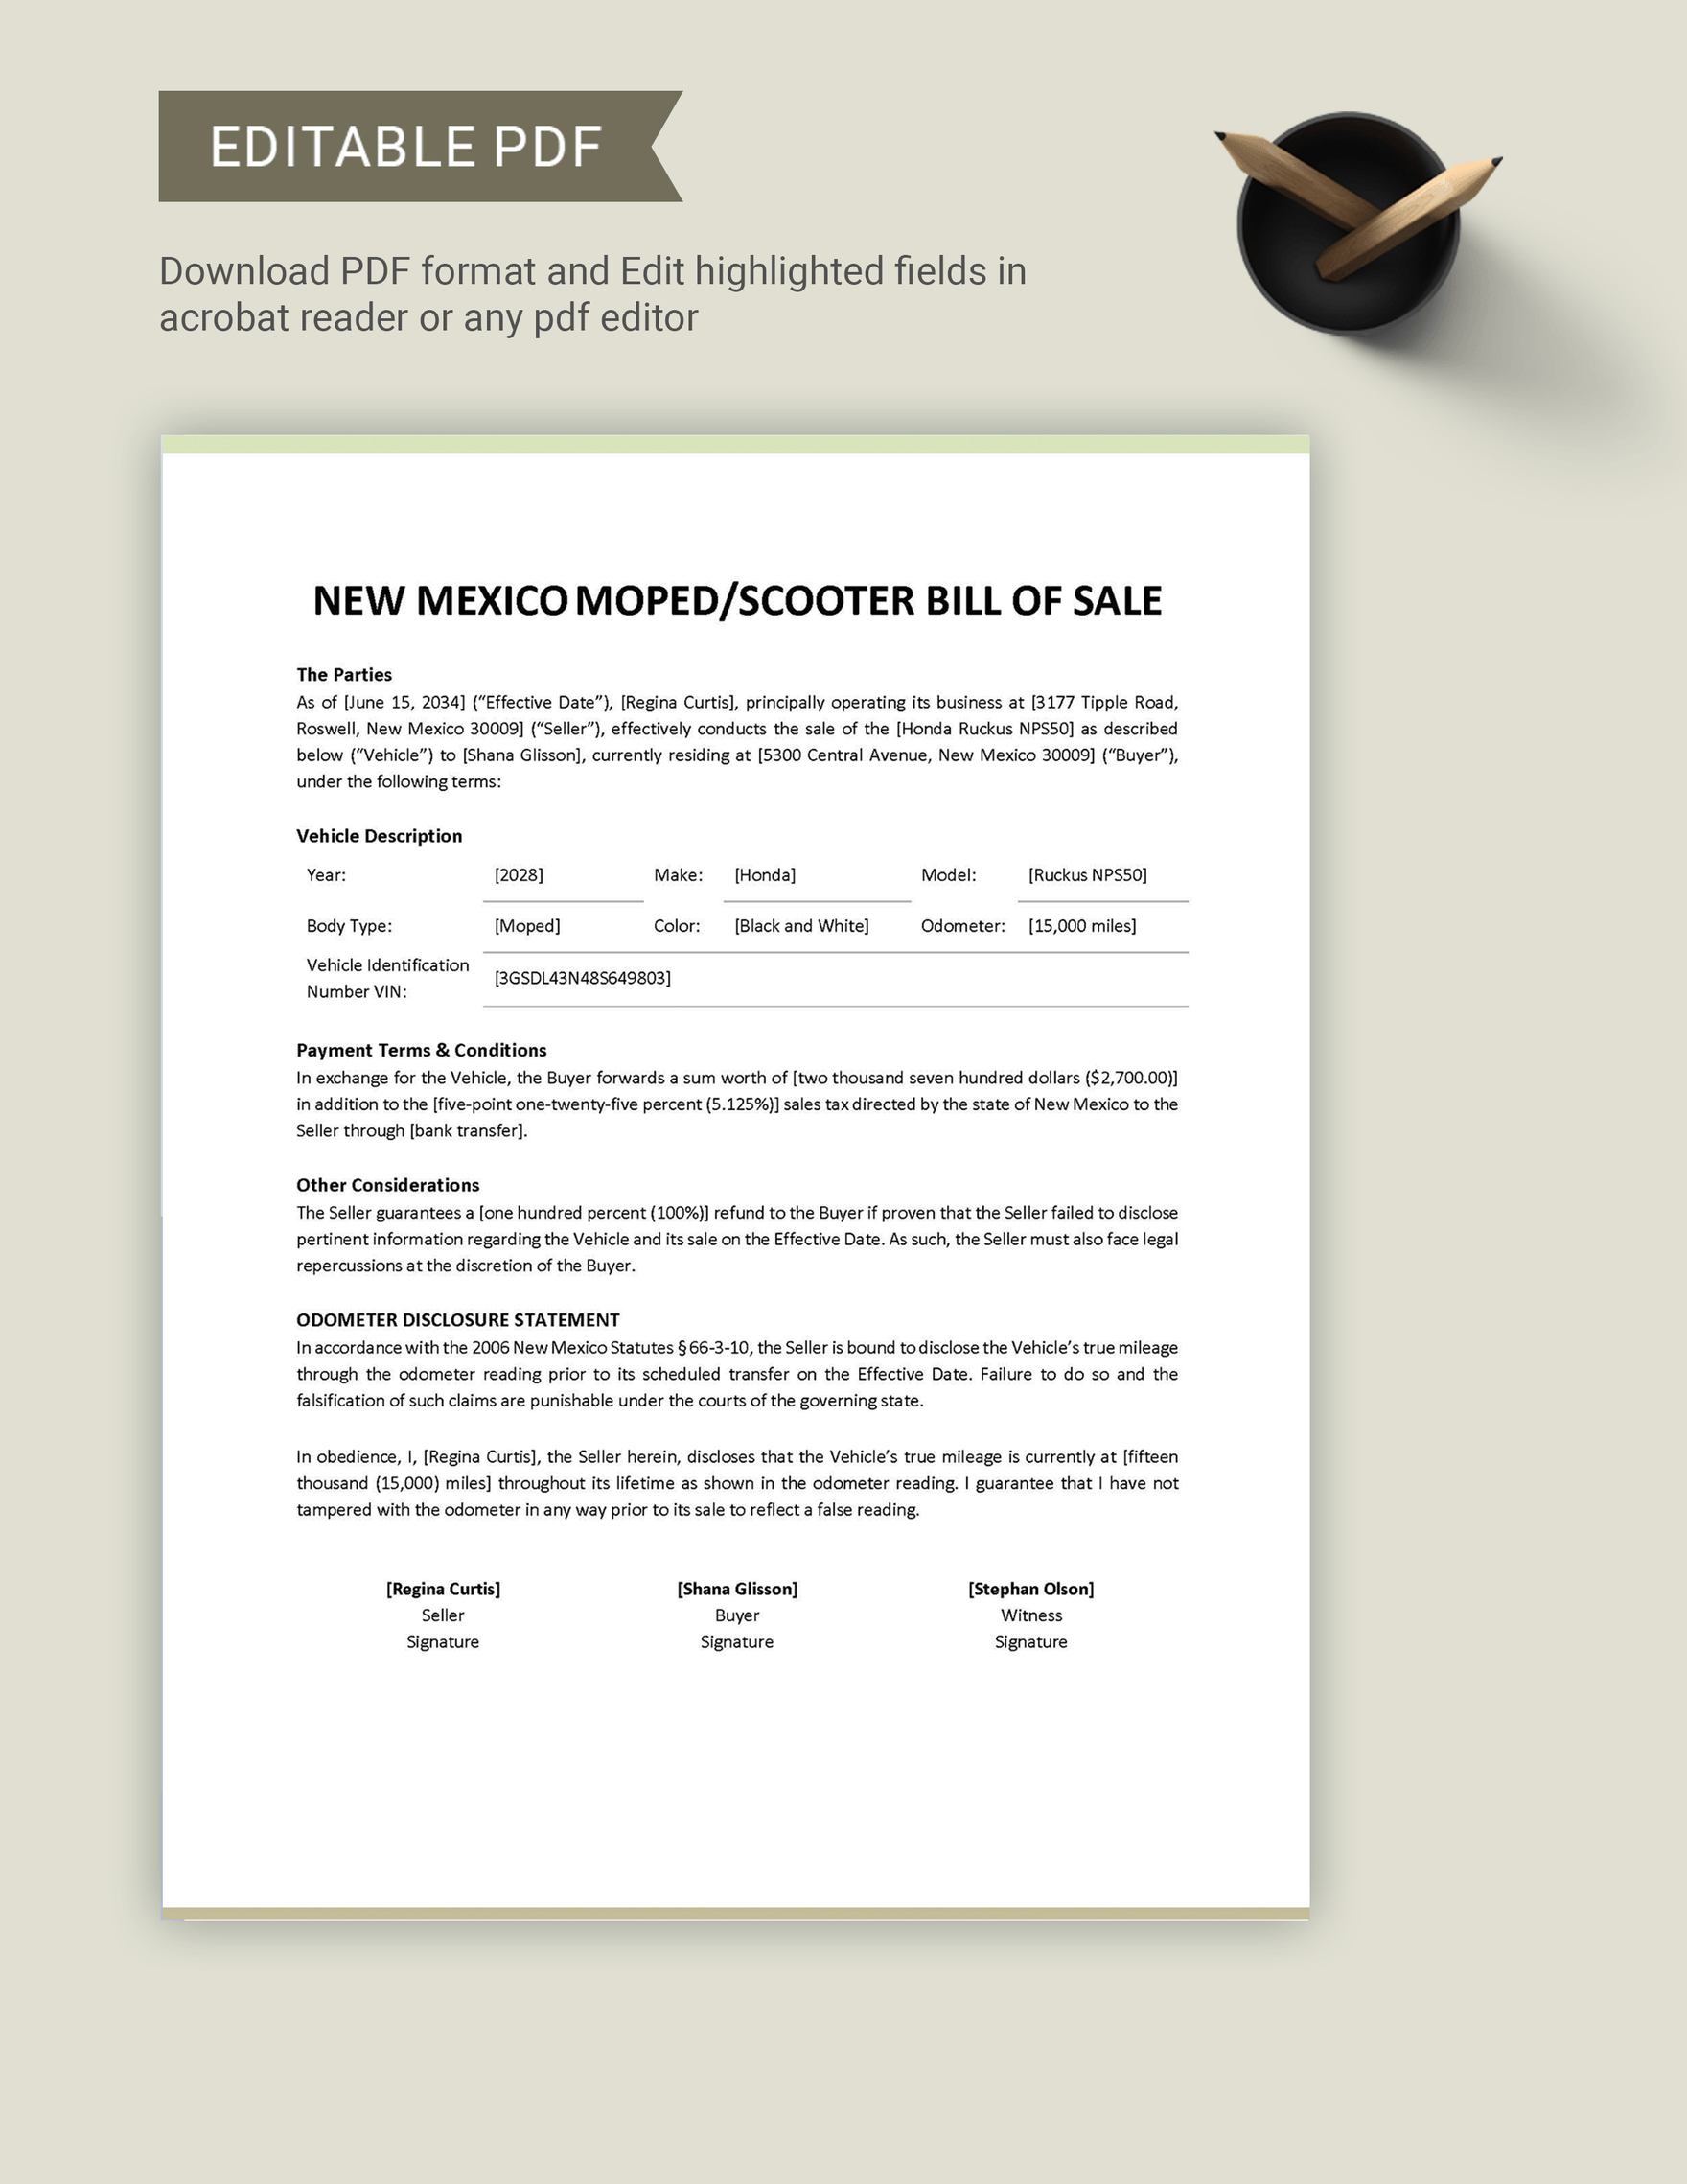 New Mexico Moped / Scooter Bill of Sale Form Template